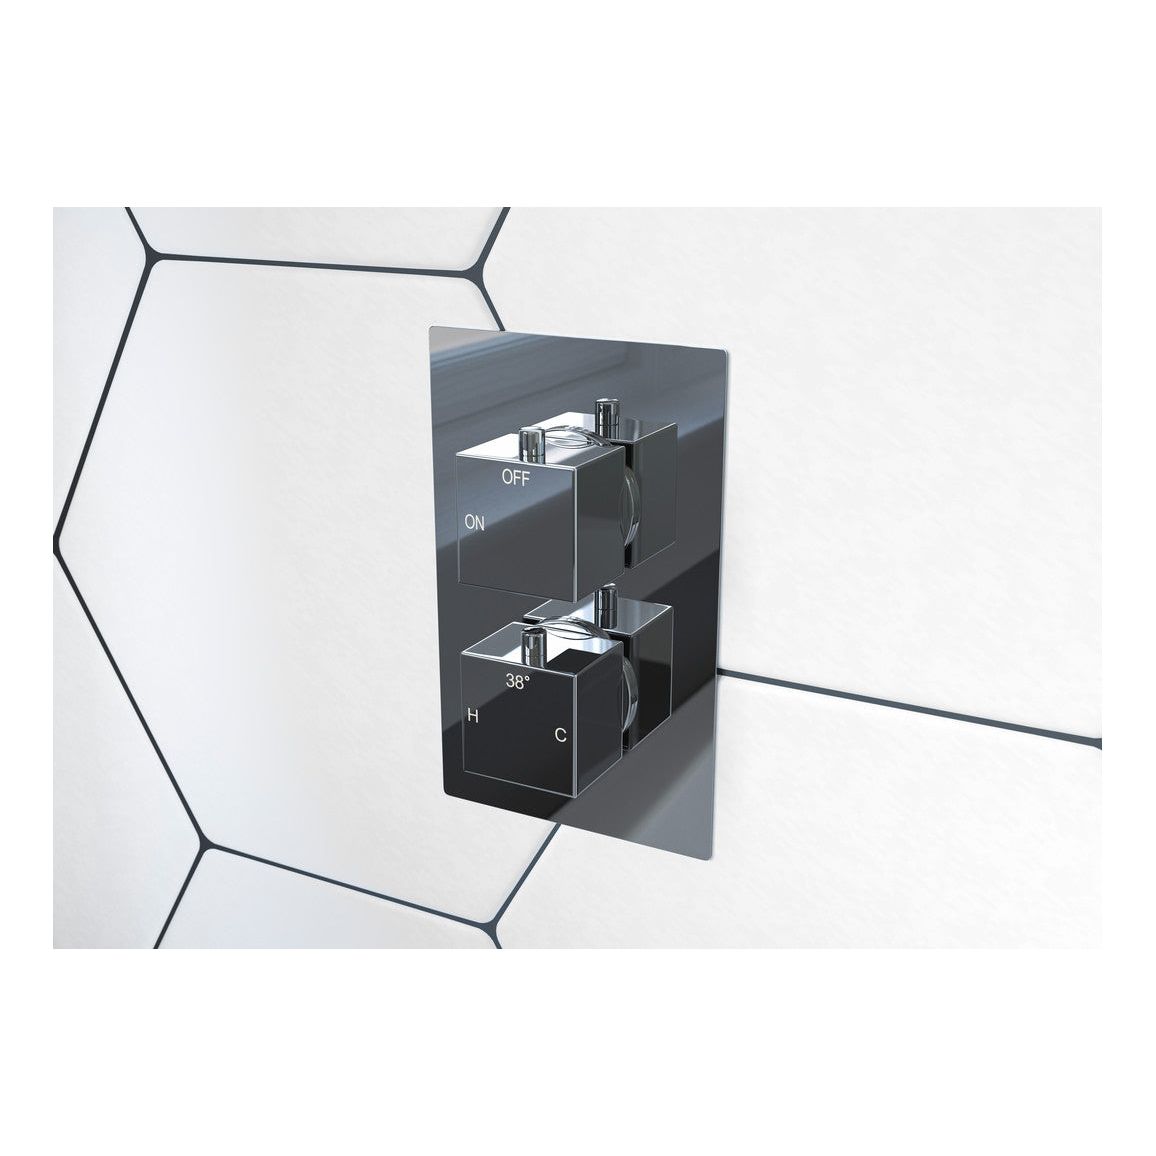 Eubank Thermostatic Two Outlet Twin Shower Valve